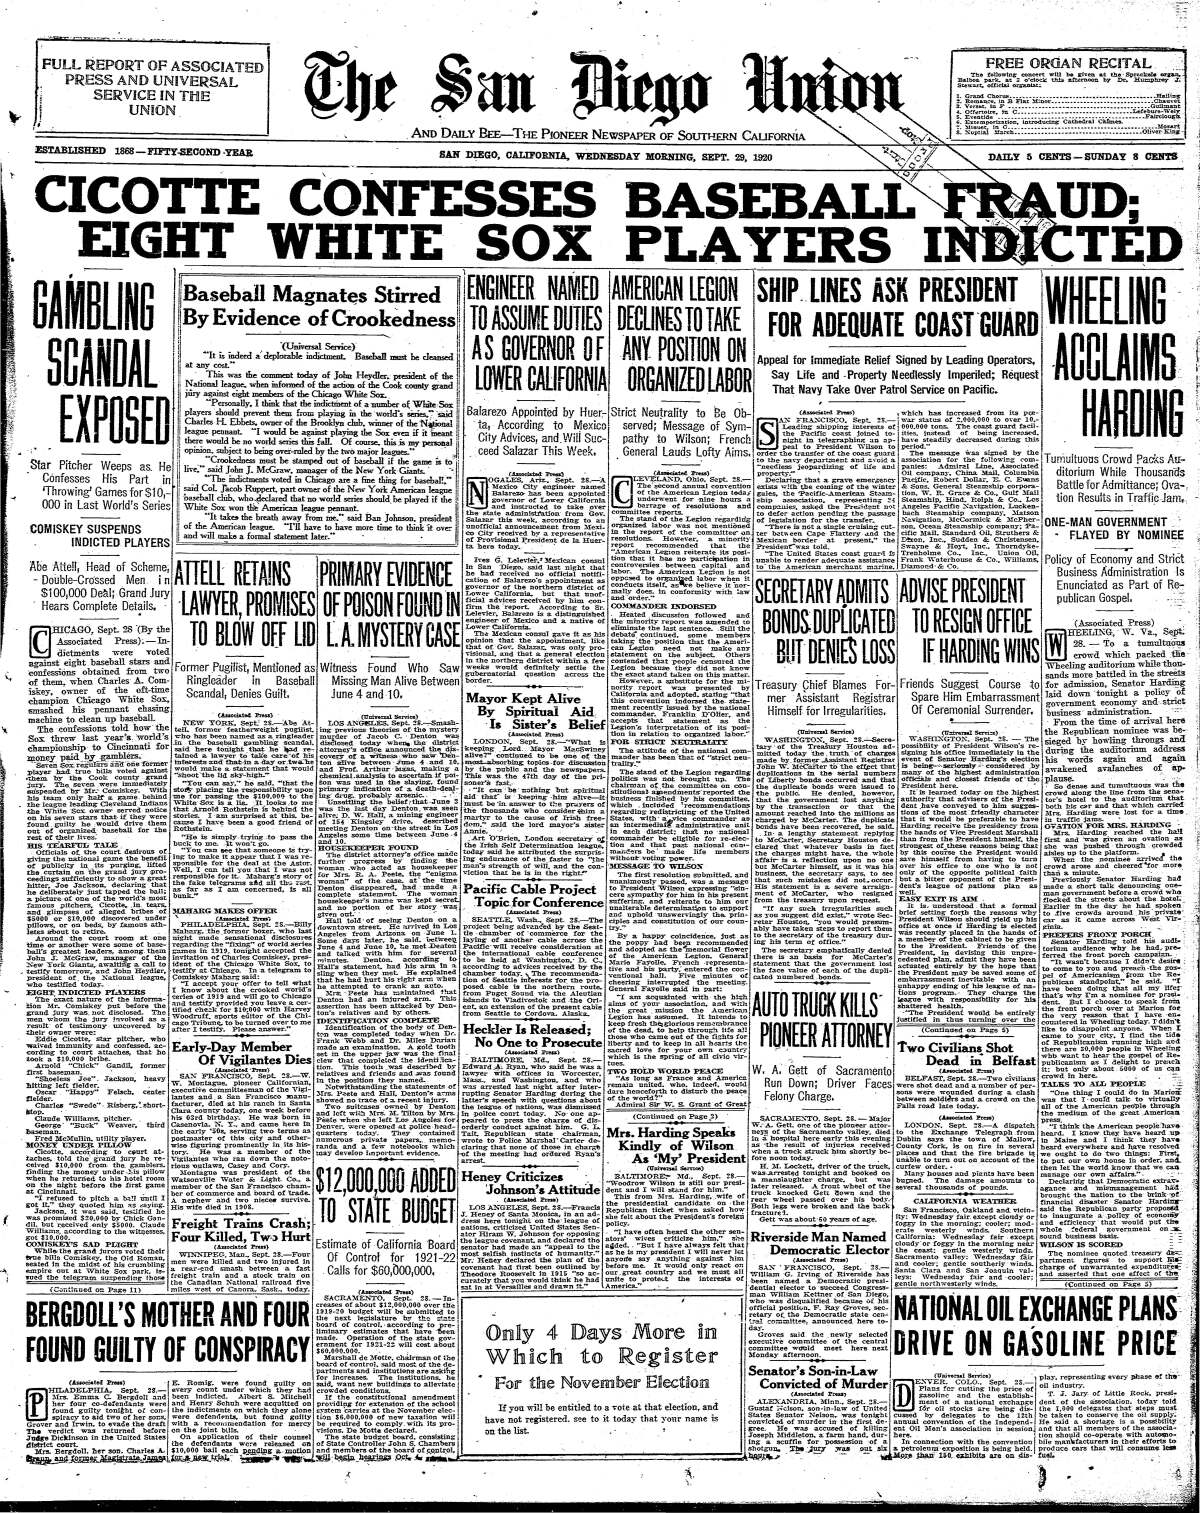 What Baseball's Black Sox Scandal Has To Teach Us 100 Years Later